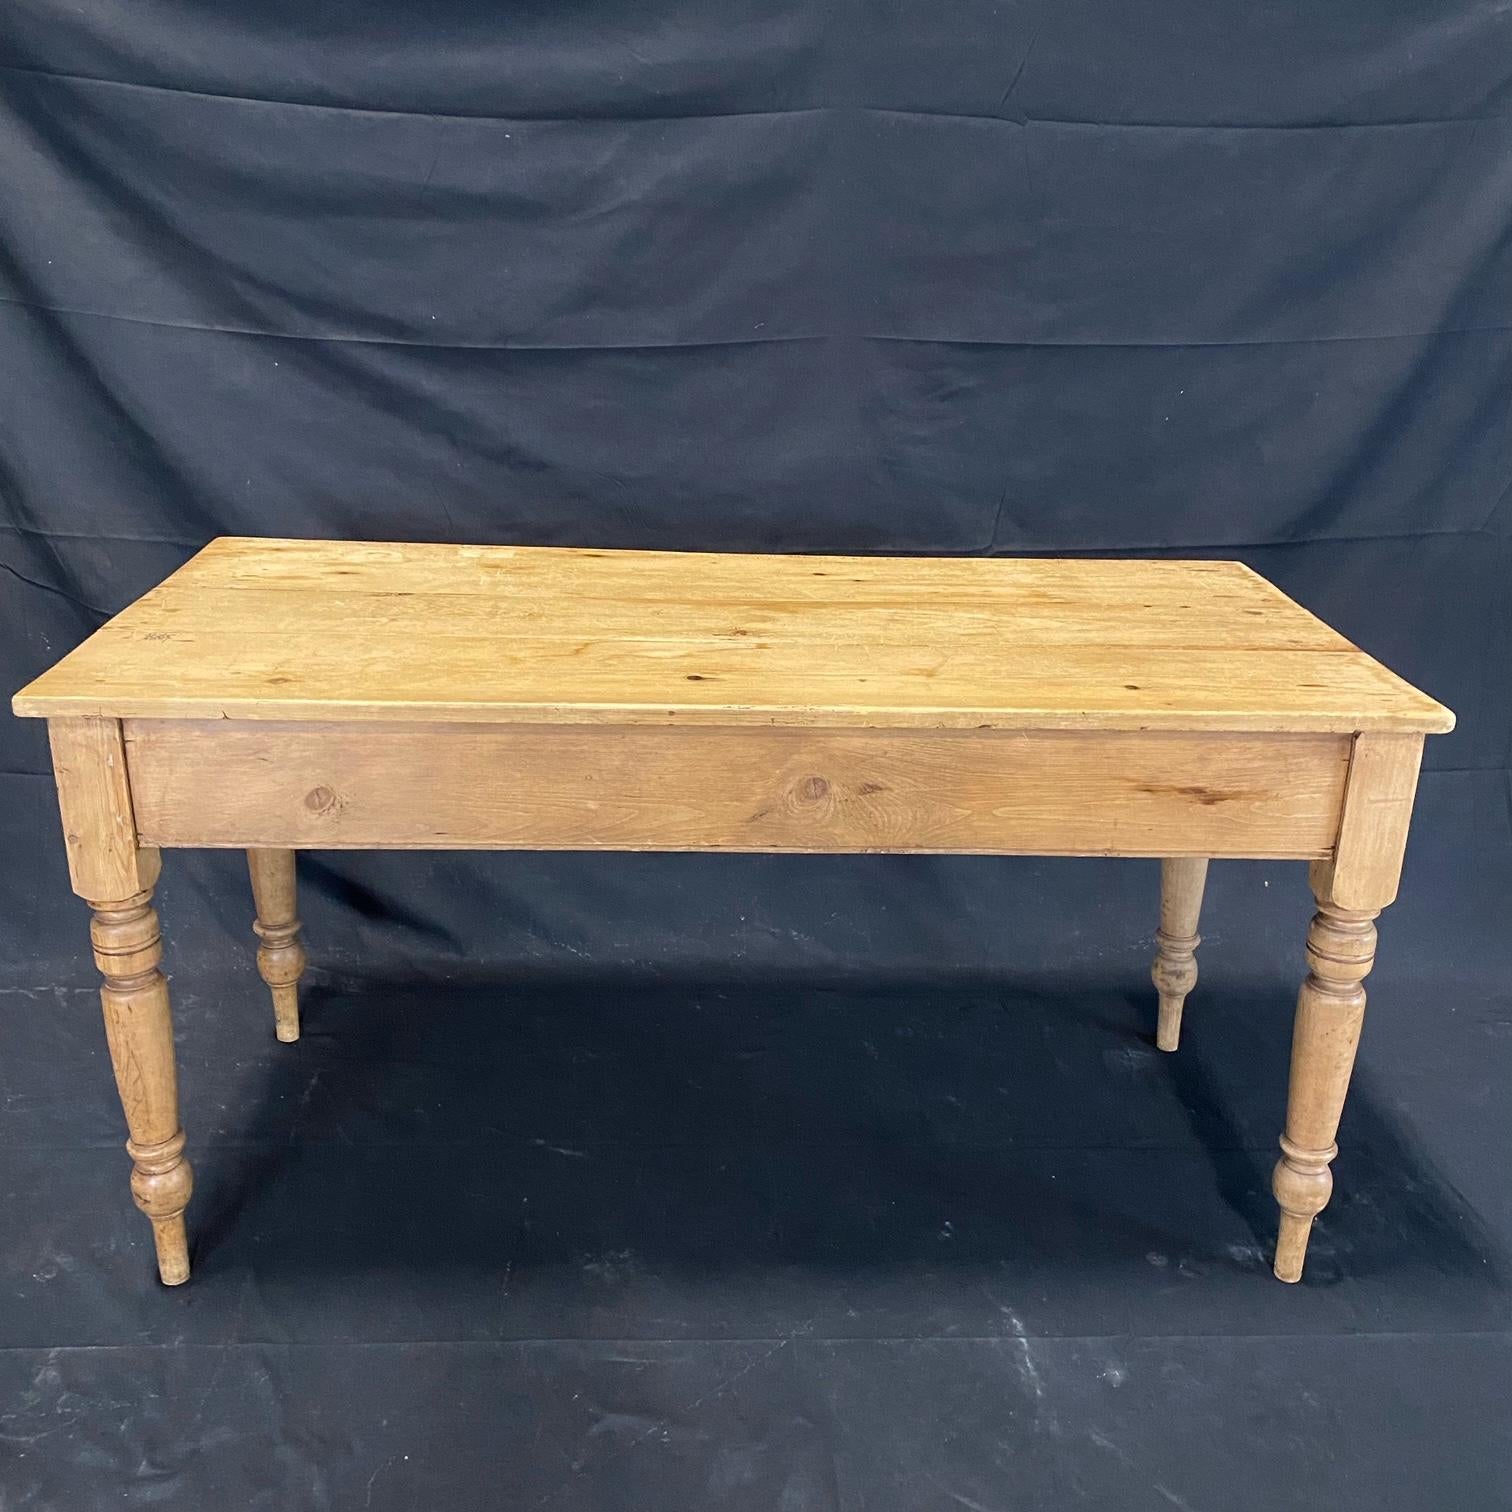 A beautiful antique multi use scrubbed pine British table, desk, console, or kitchen prep table. The table is in wonderful condition with a traditional plank top and retains the original scrubbed pine finish with beautiful patina. The base is of